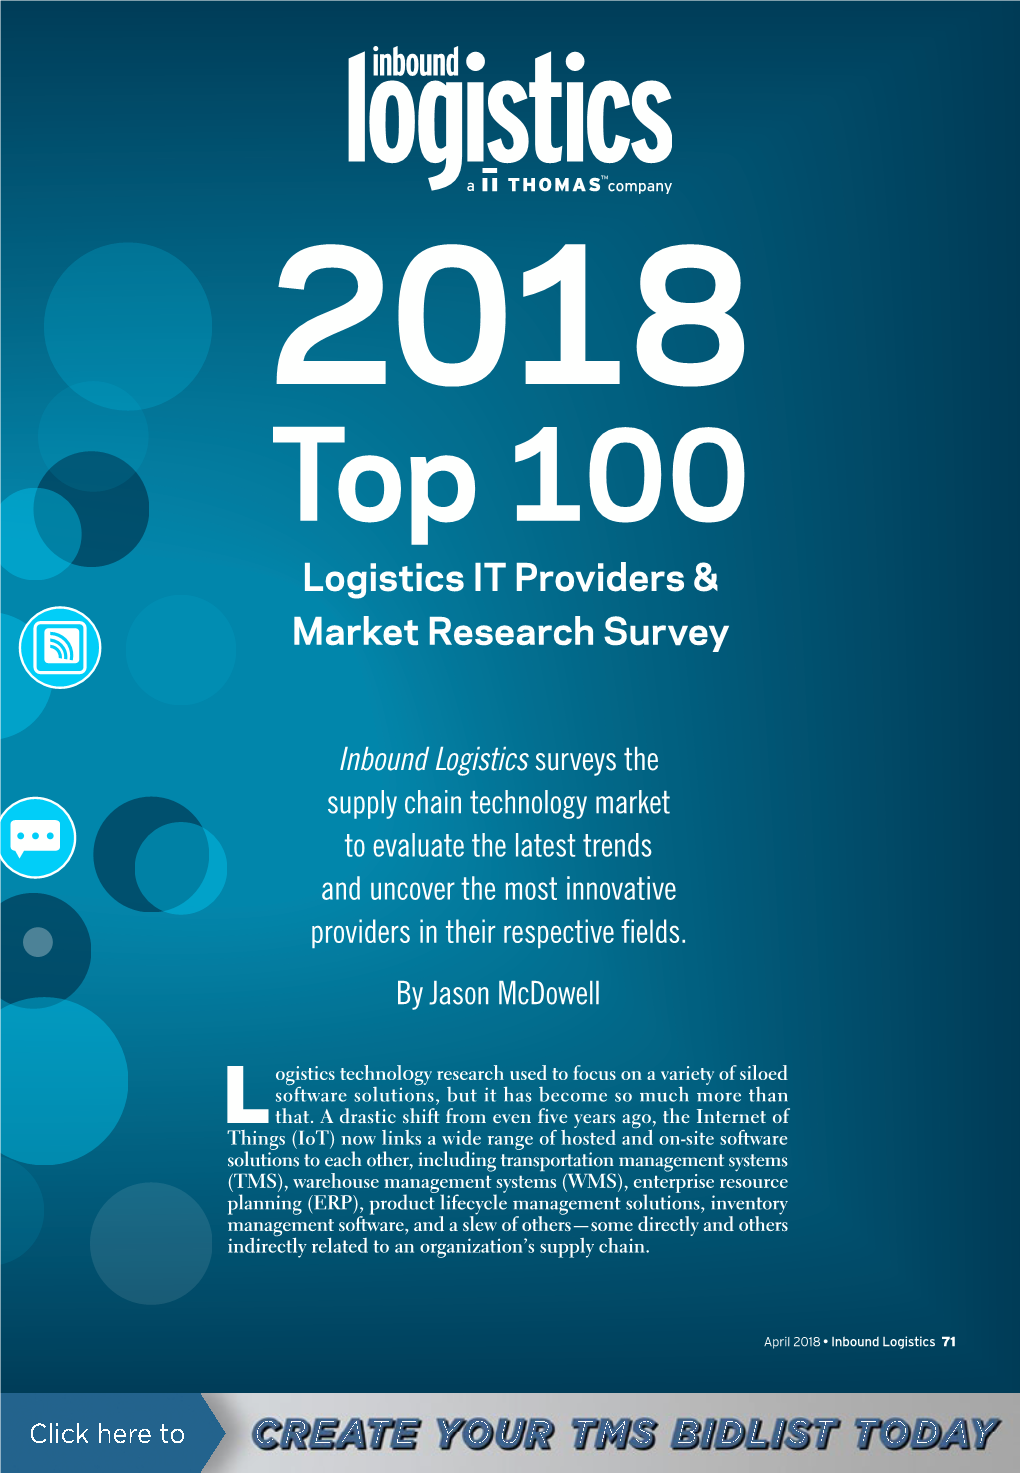 Top 100 Logistics IT Providers and Market Research Survey